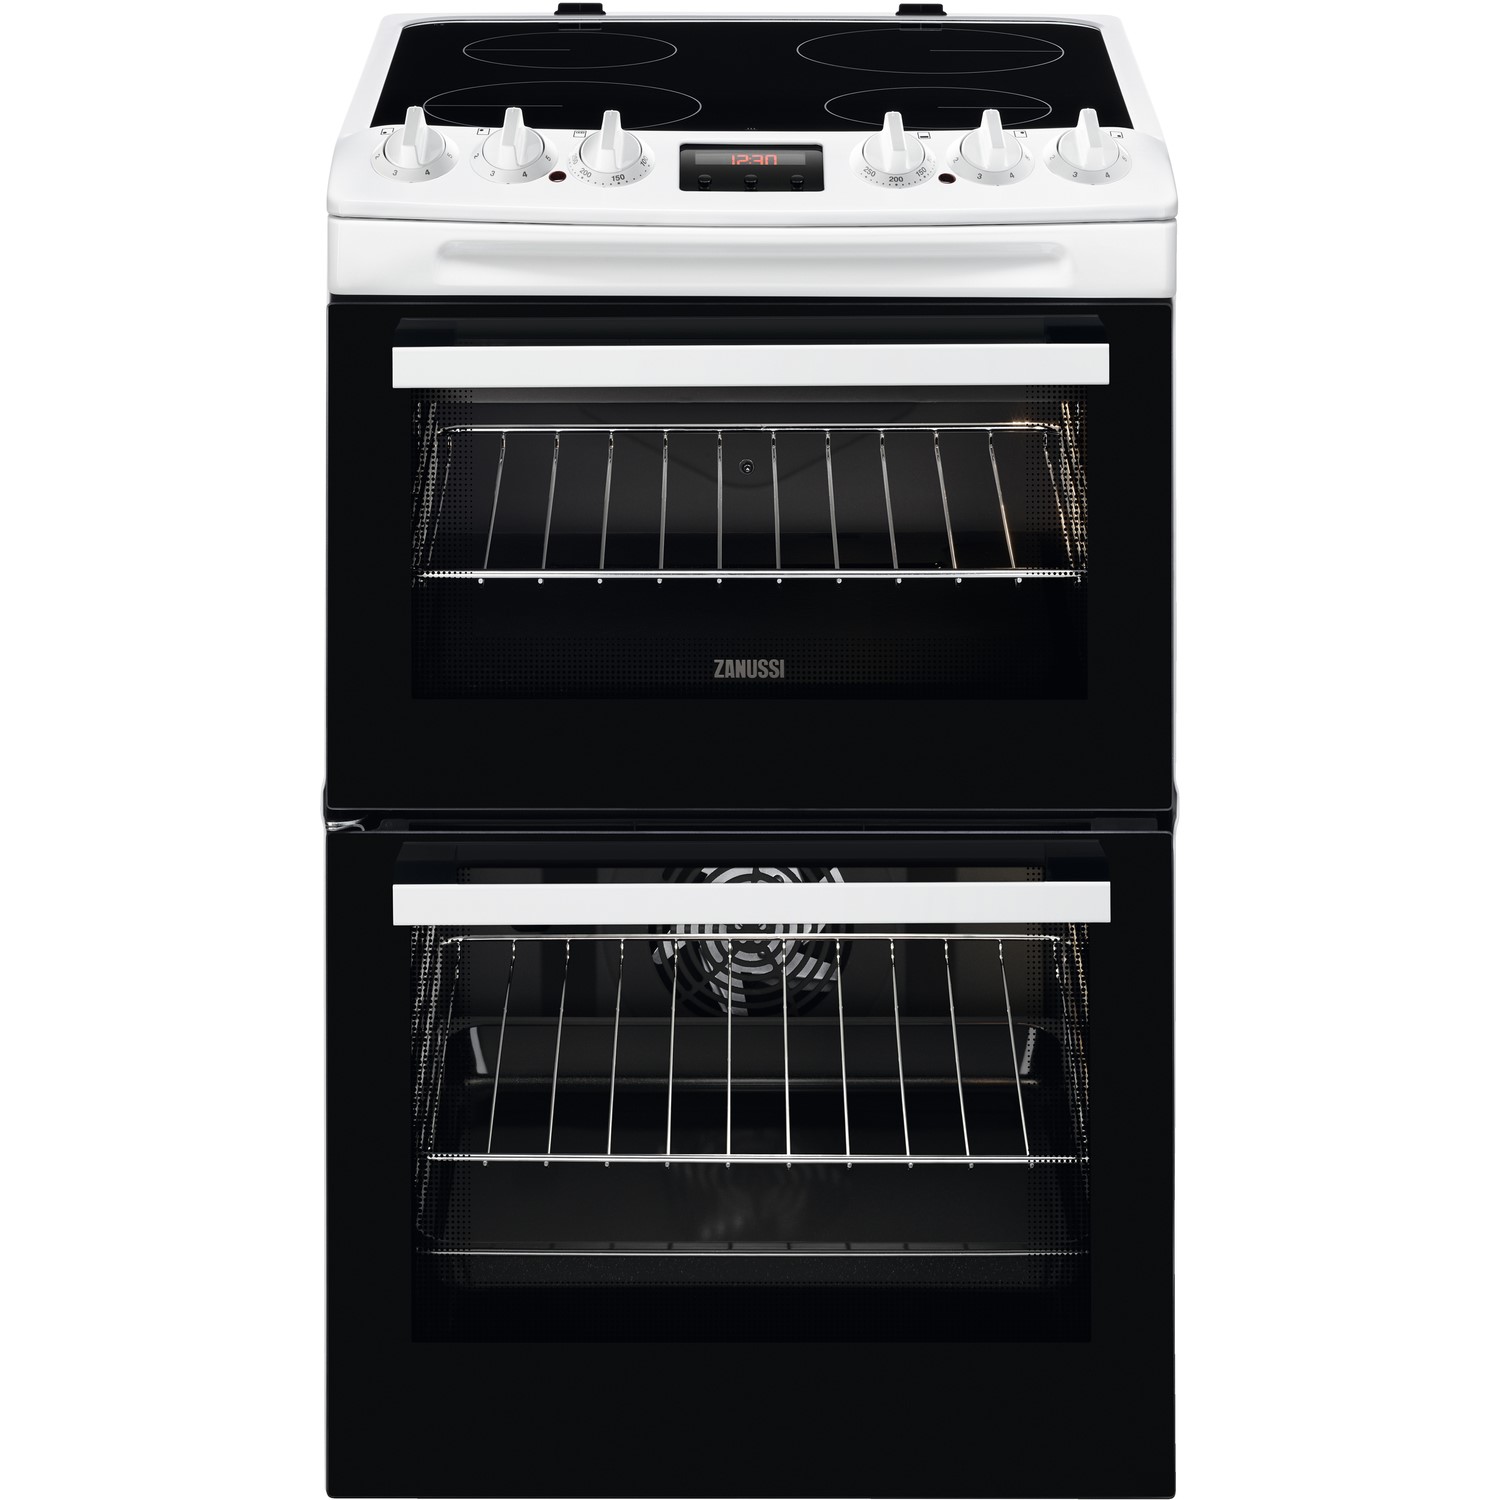 Zanussi 55cm Double Oven Electric Cooker with Catalytic Liners - White